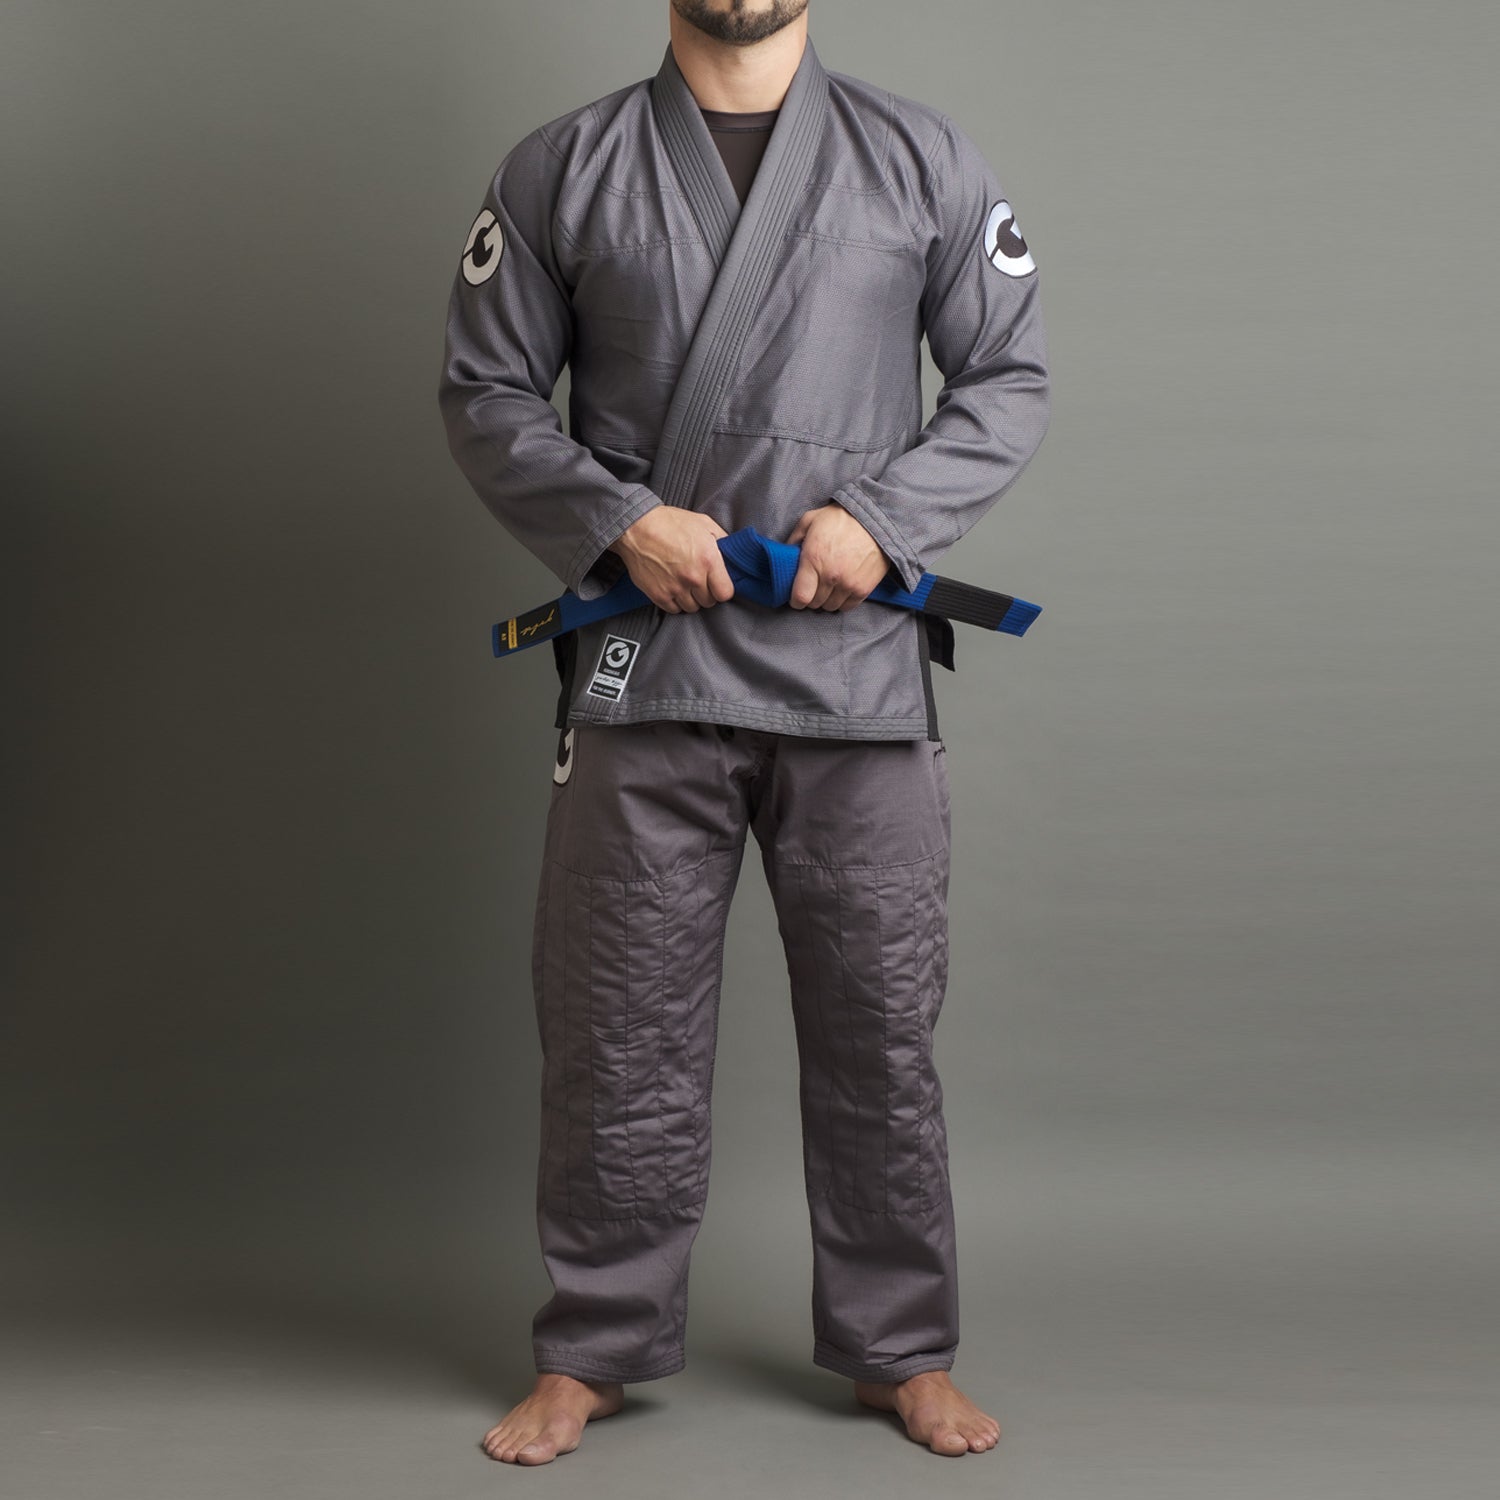 BJJ Blue Belt Requirements 2.0 - Apps on Google Play